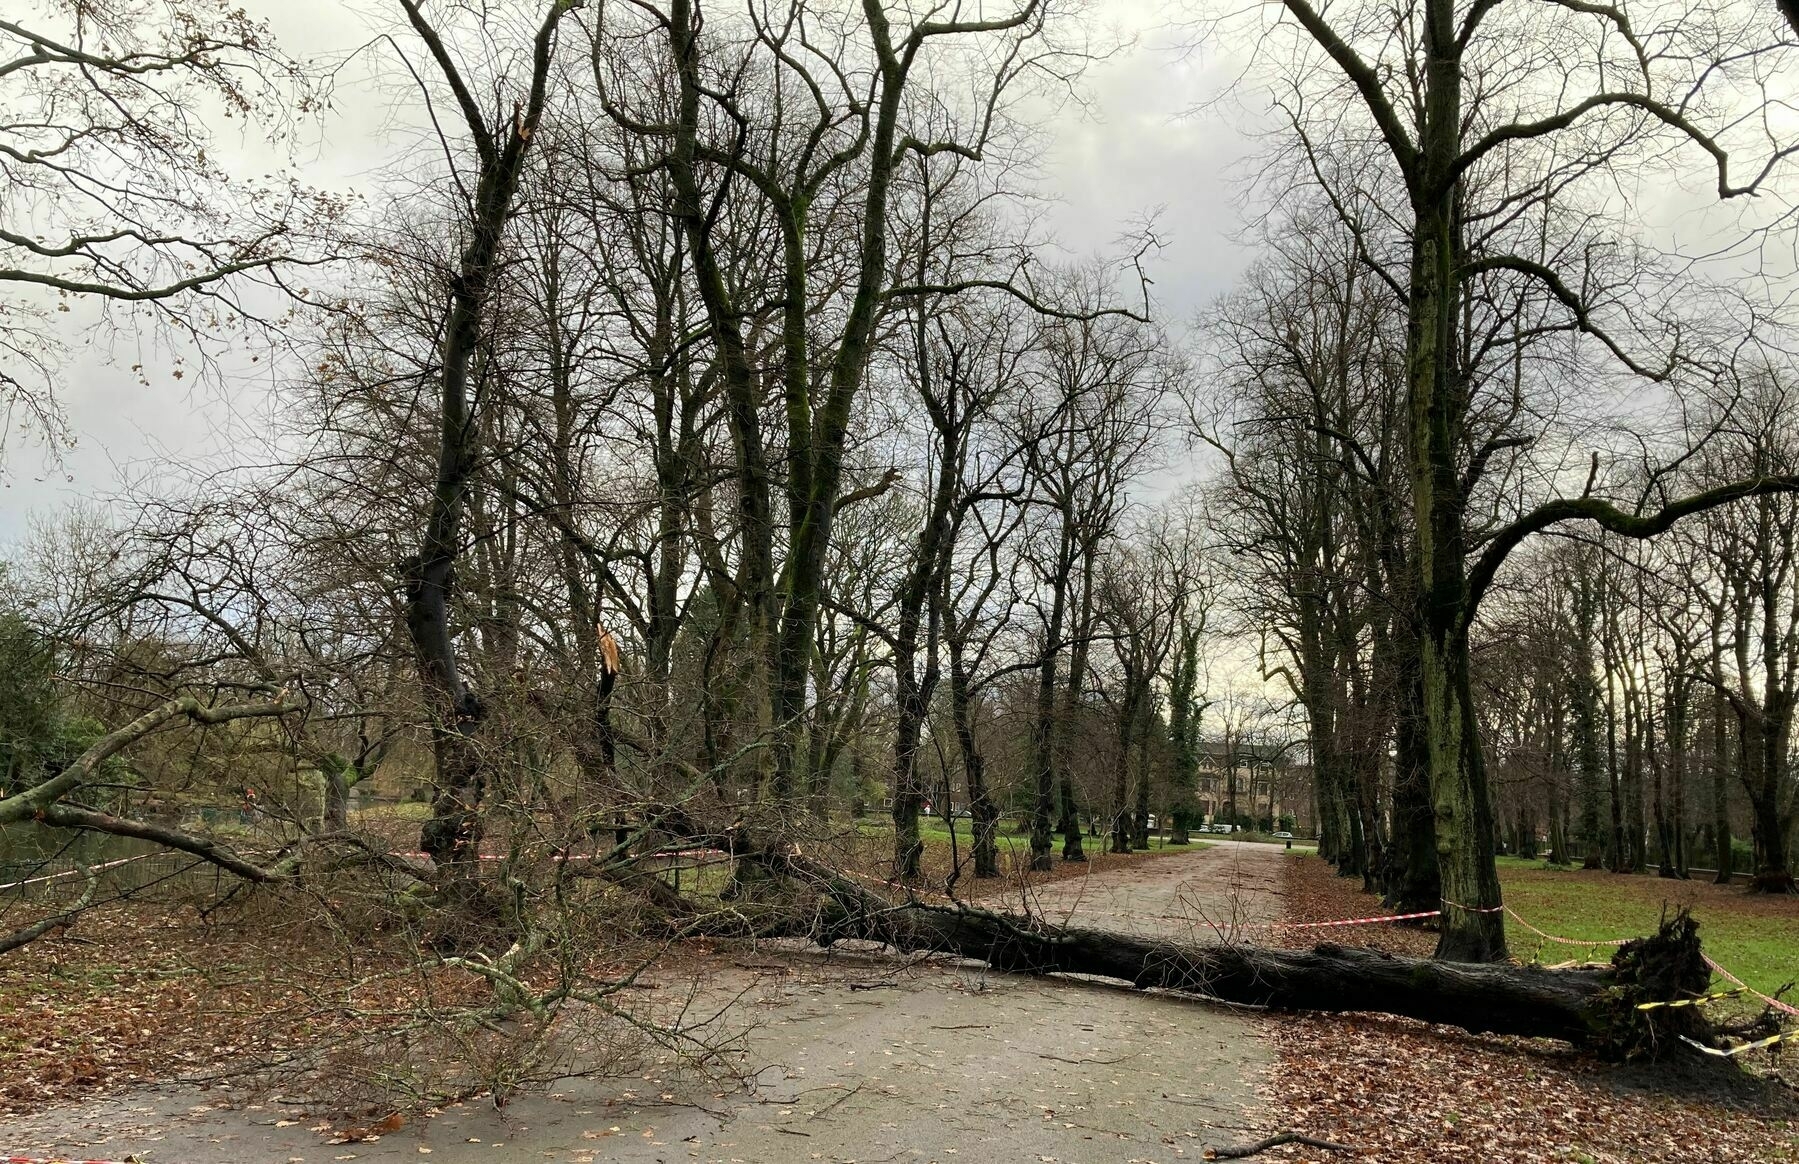 A large tree from an avenue fallen across the path in a park .